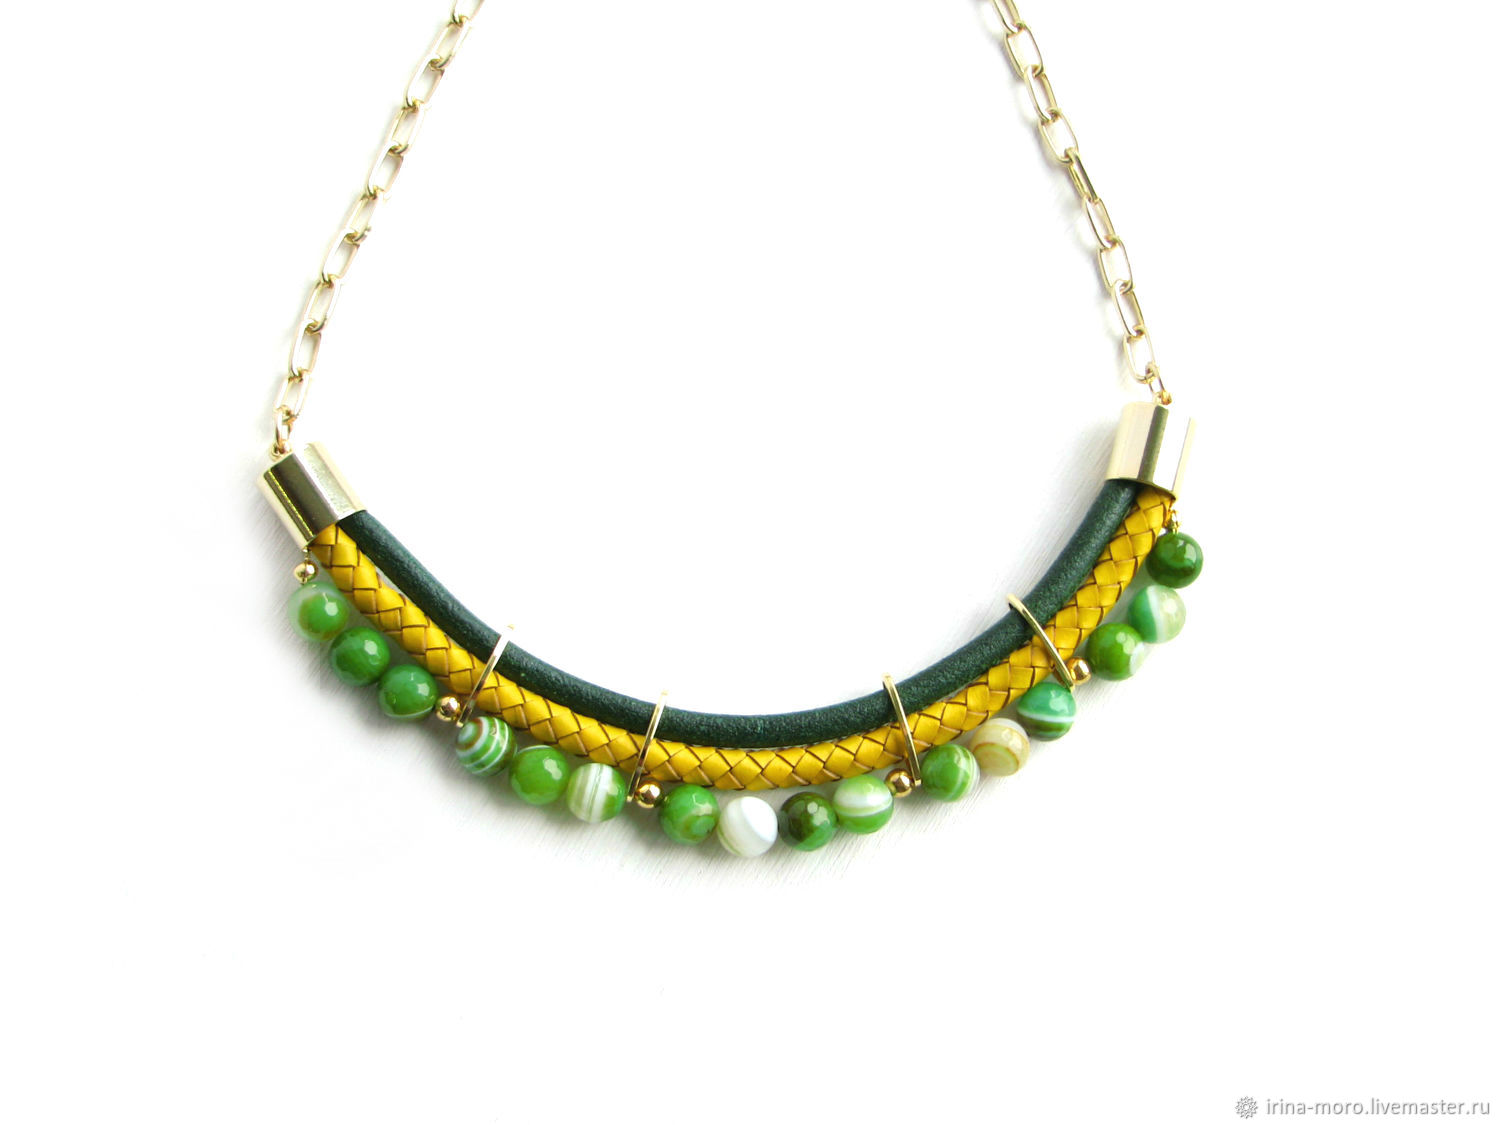 Green necklace 'Lollipops' beautiful necklace with natural stones, Necklace, Moscow,  Фото №1